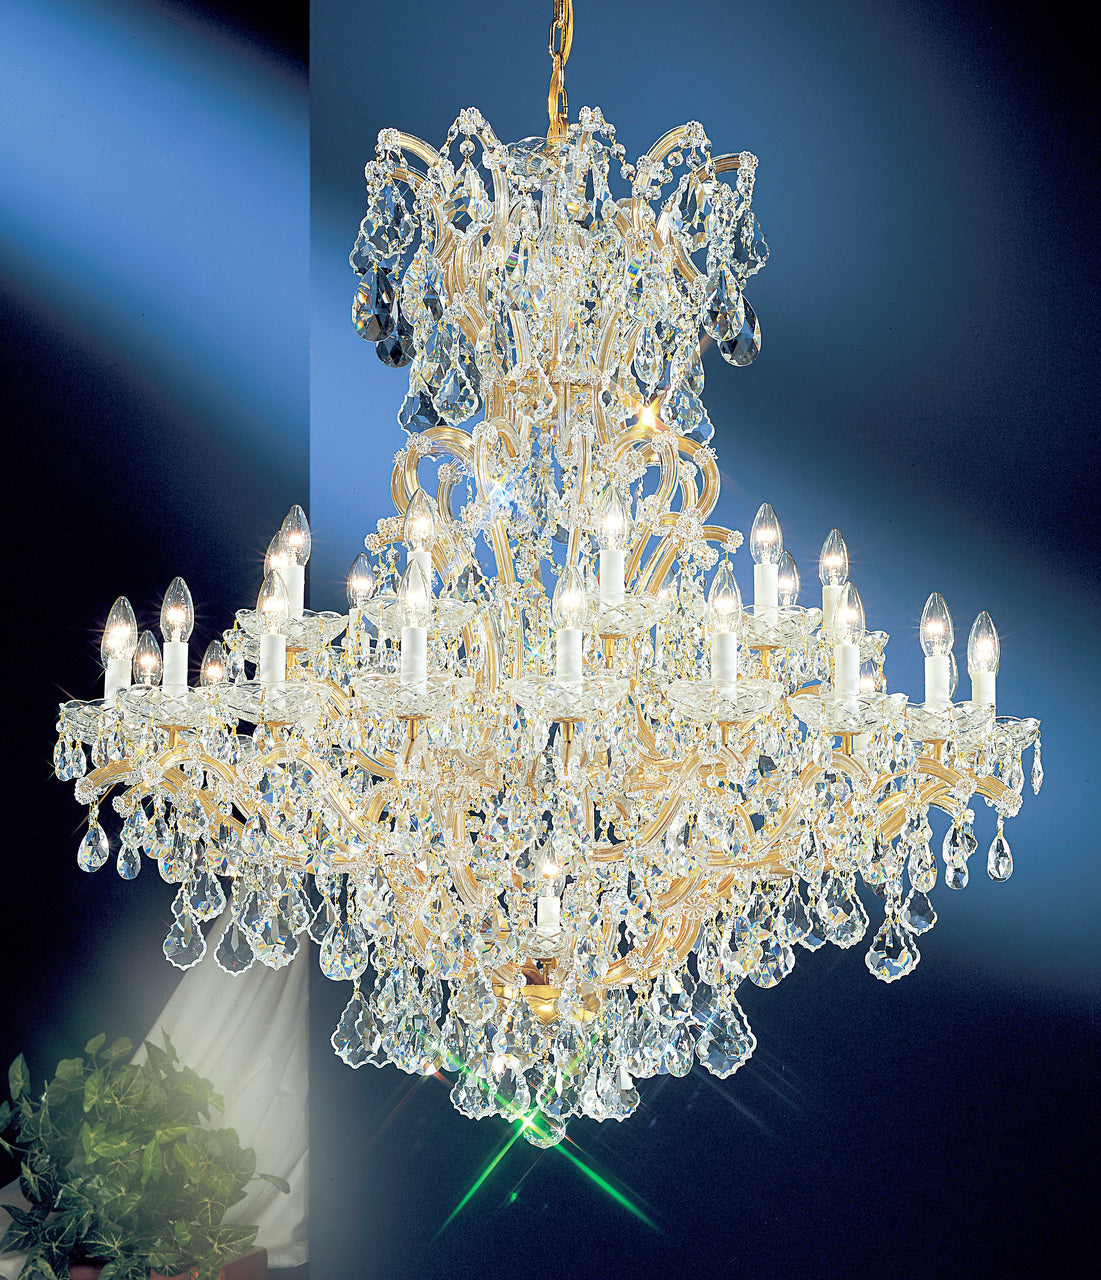 Classic Lighting 8163 OWG C Maria Theresa Traditional Crystal Chandelier in Olde World Gold (Imported from Italy)